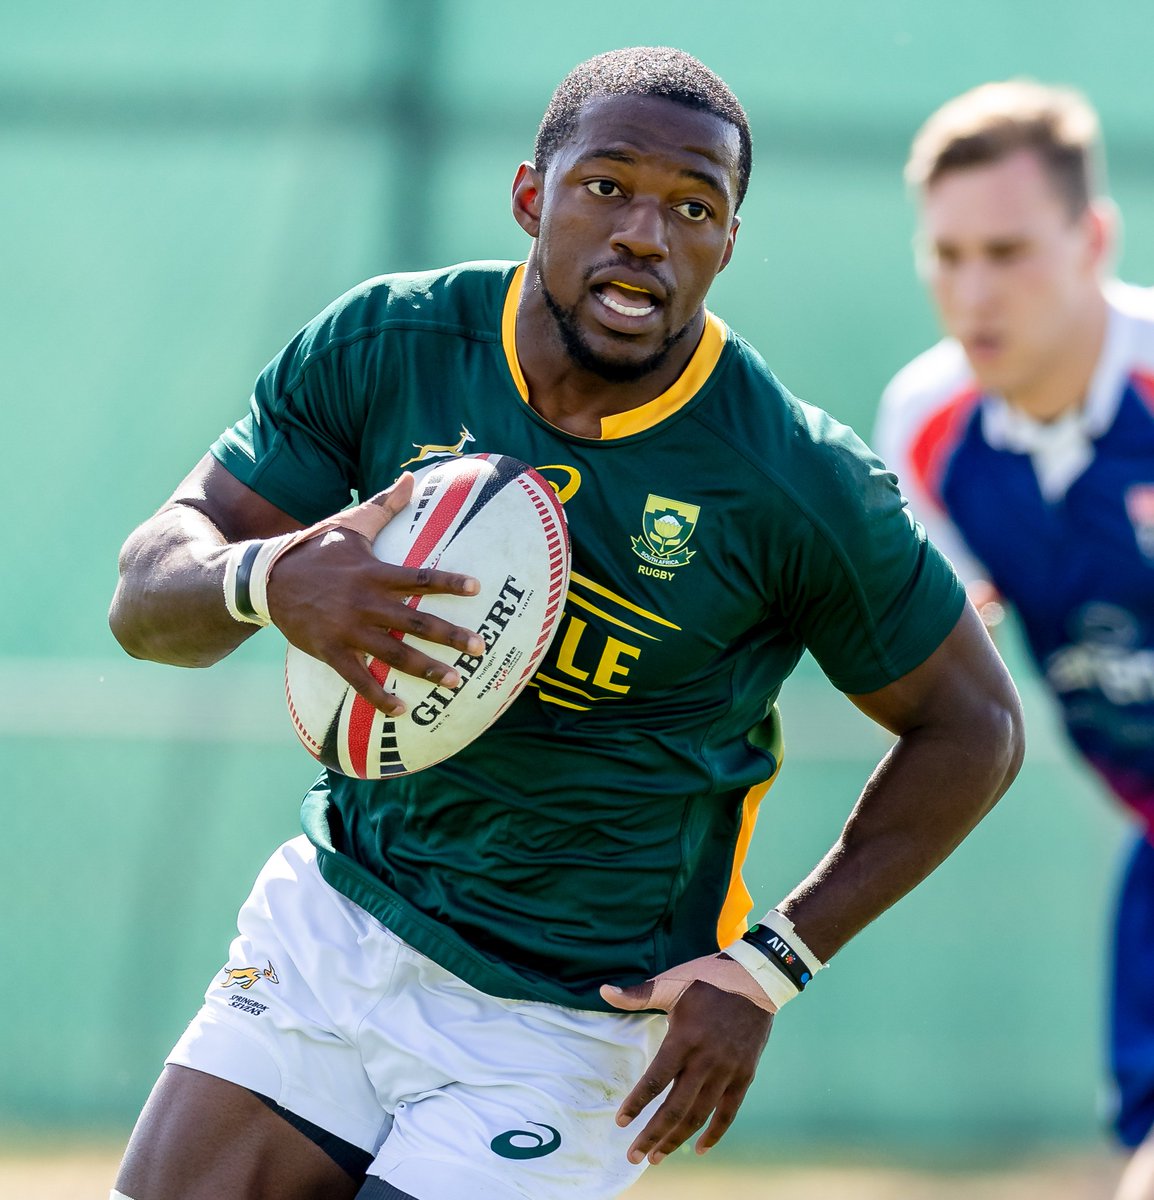 Ndhlovu included in Blitzboks lineup for Canada Sevens - Sports Leo